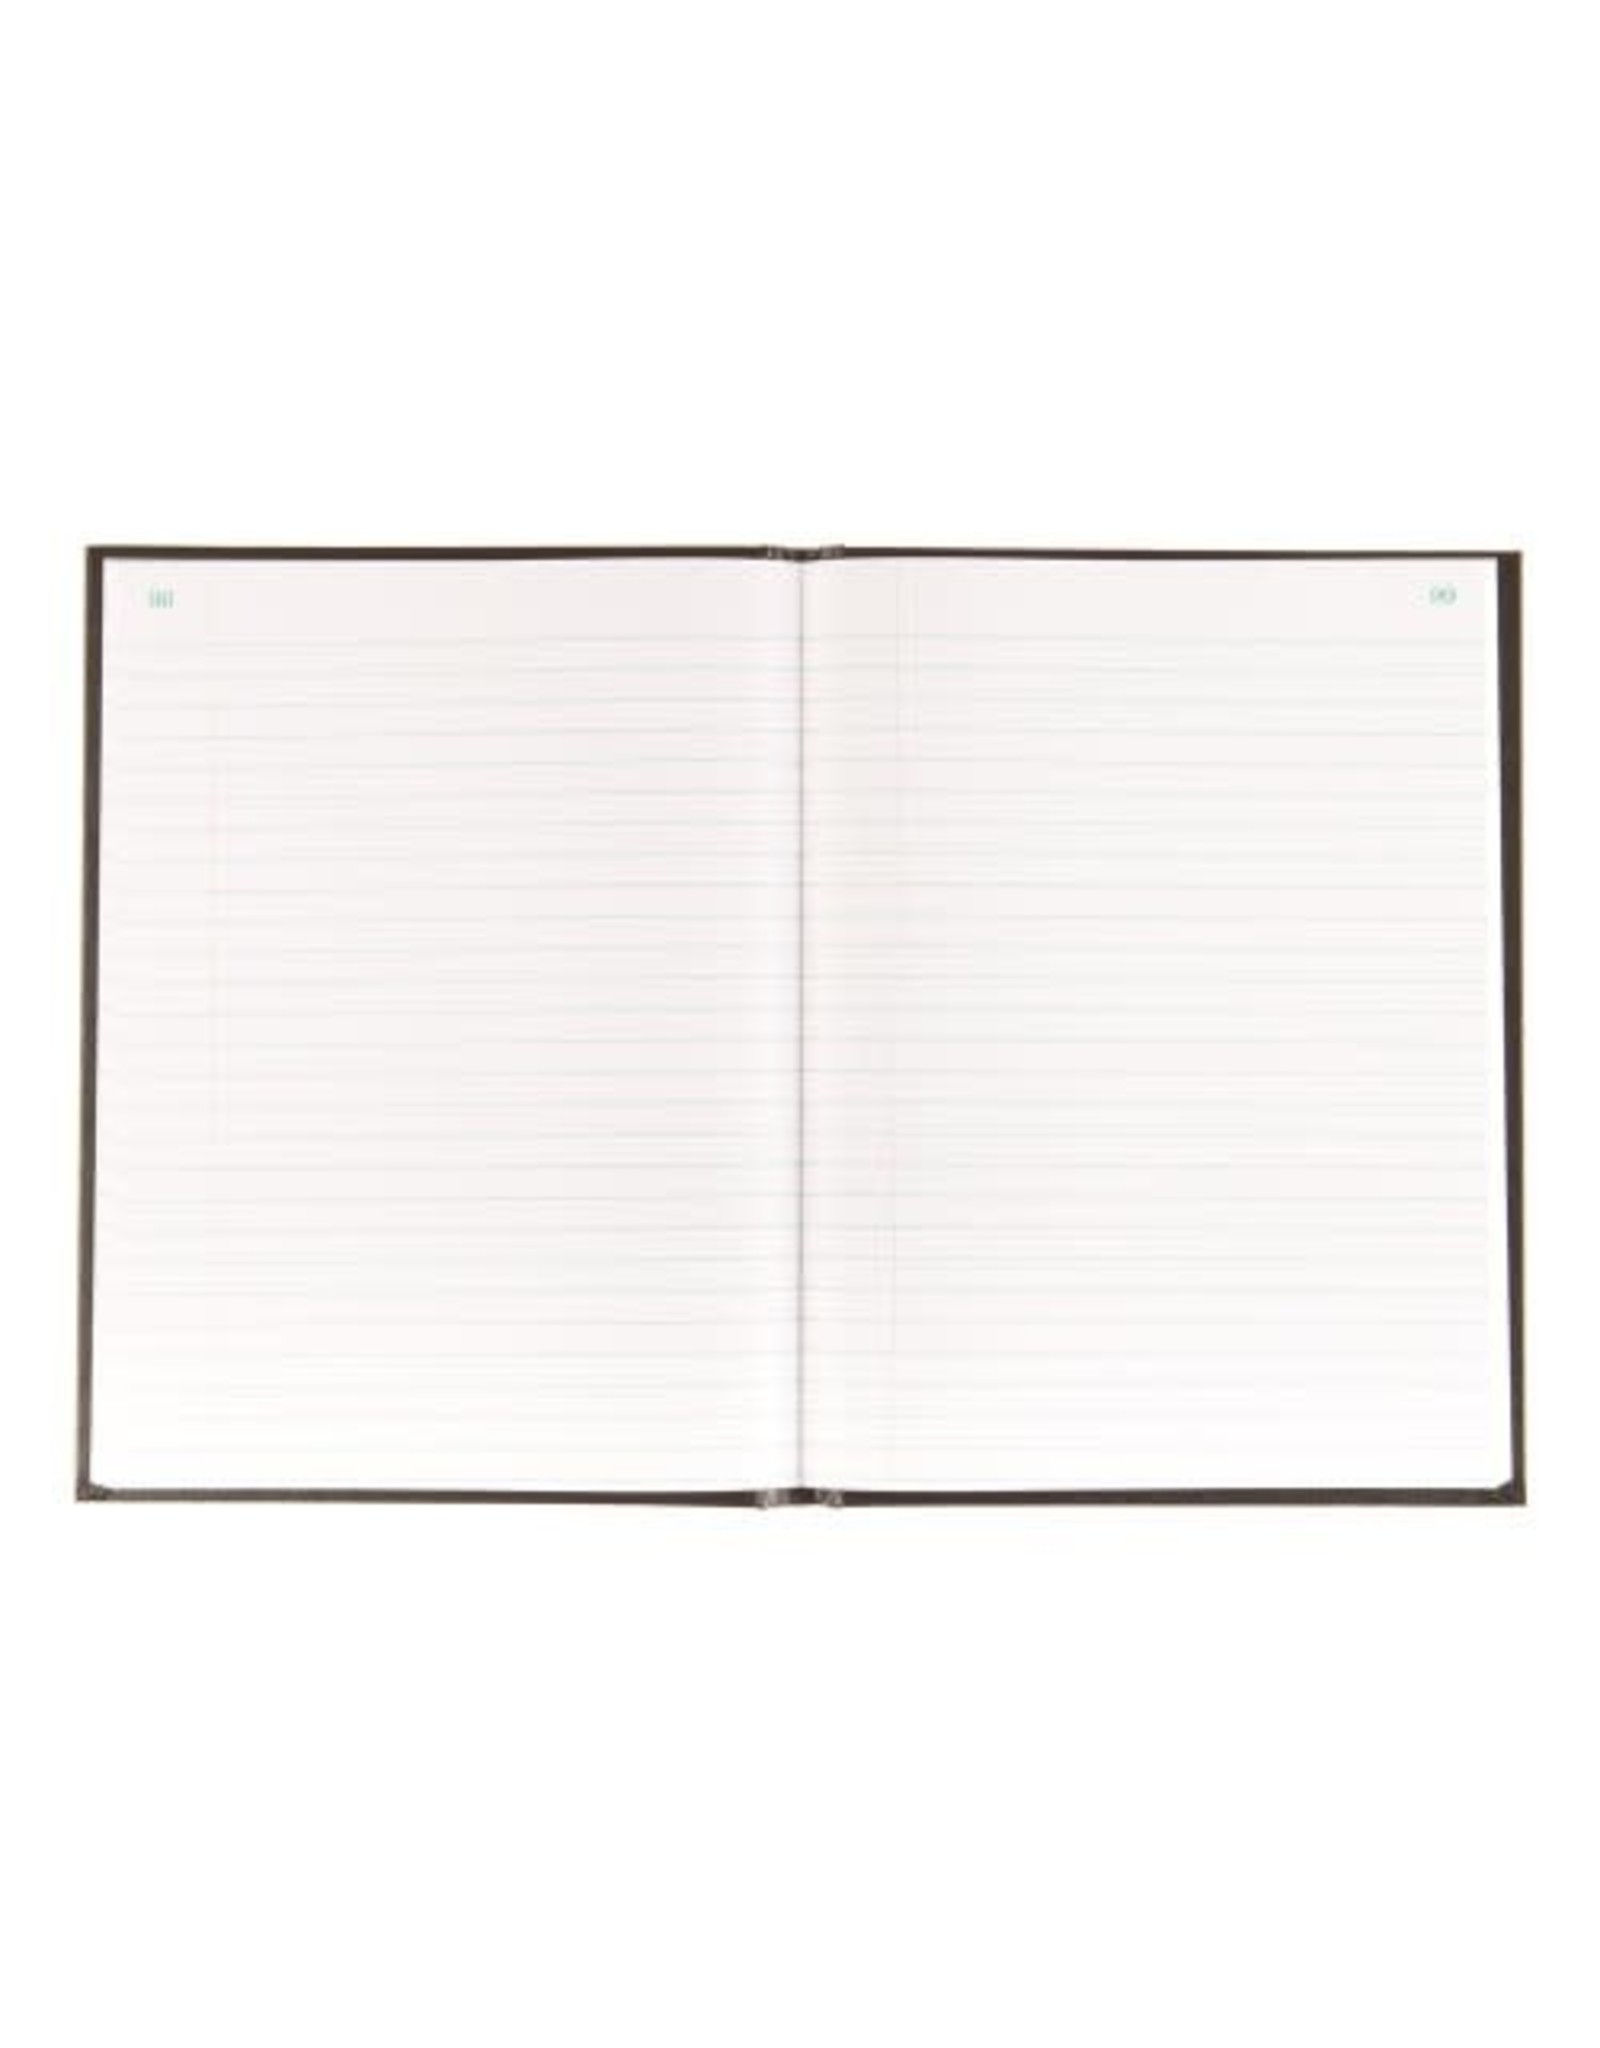 Blueline ACCOUNT BOOK-HARD, 200 PAGE WHITE 10.25X7-11/16 RECORD